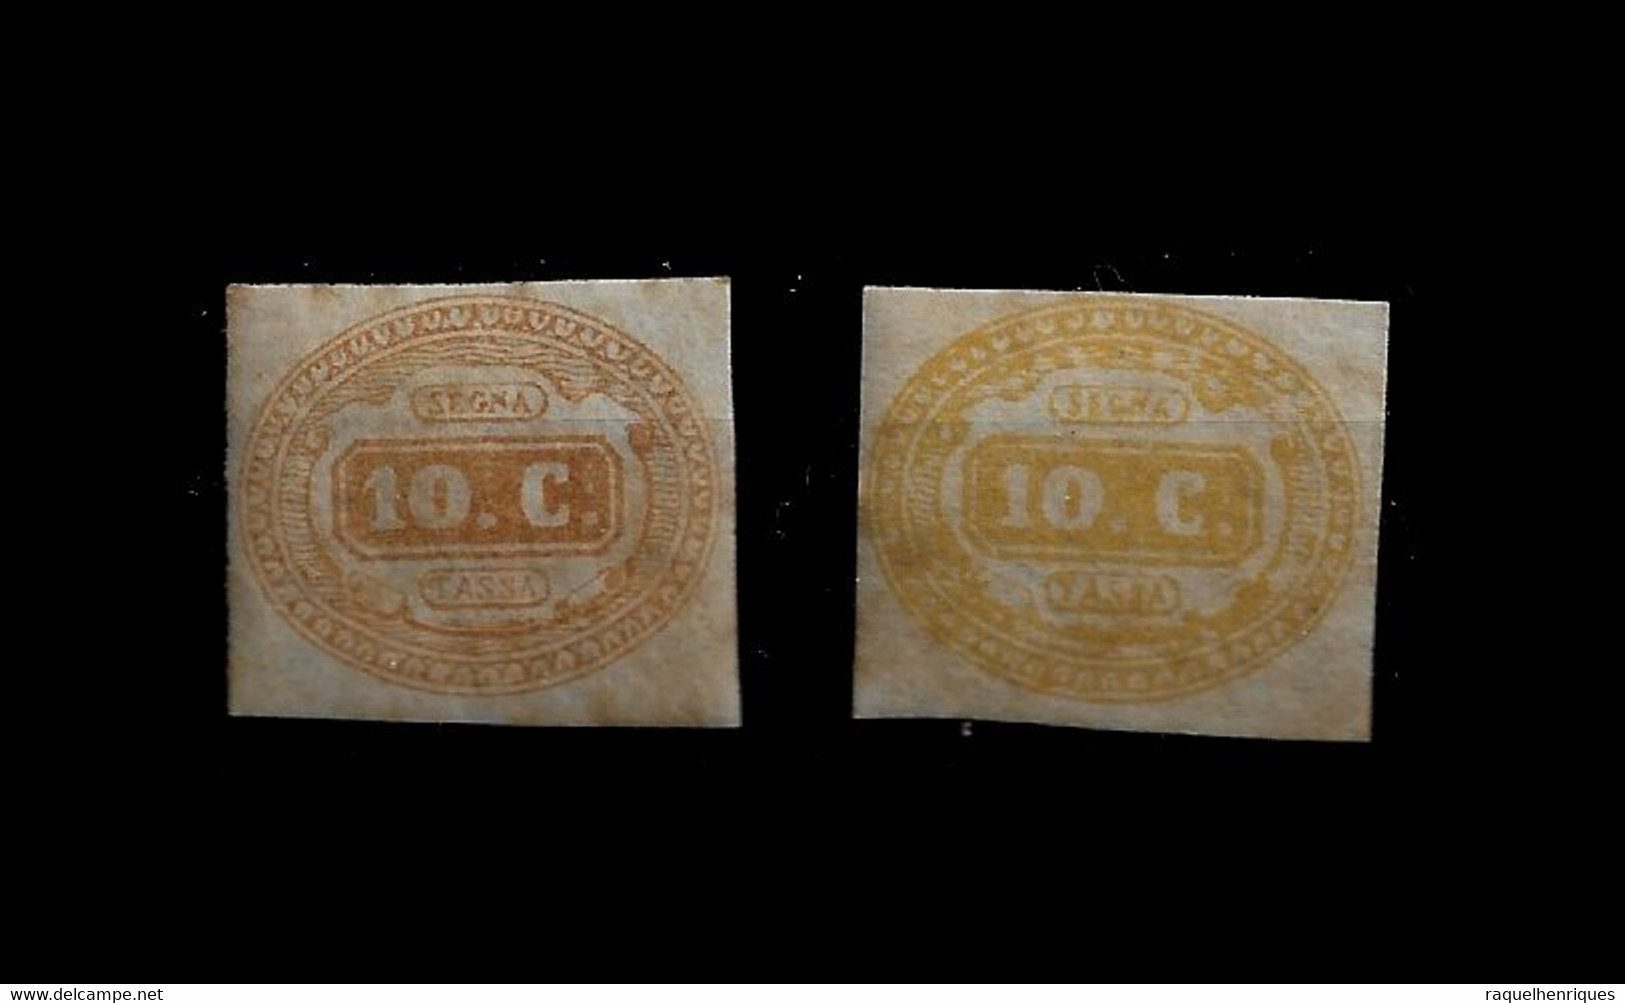 ITALY STAMP - POSTAGE DUE 1863 Figure Of Value PAIR DIF. TONES RARE (BA5#340) - Taxe